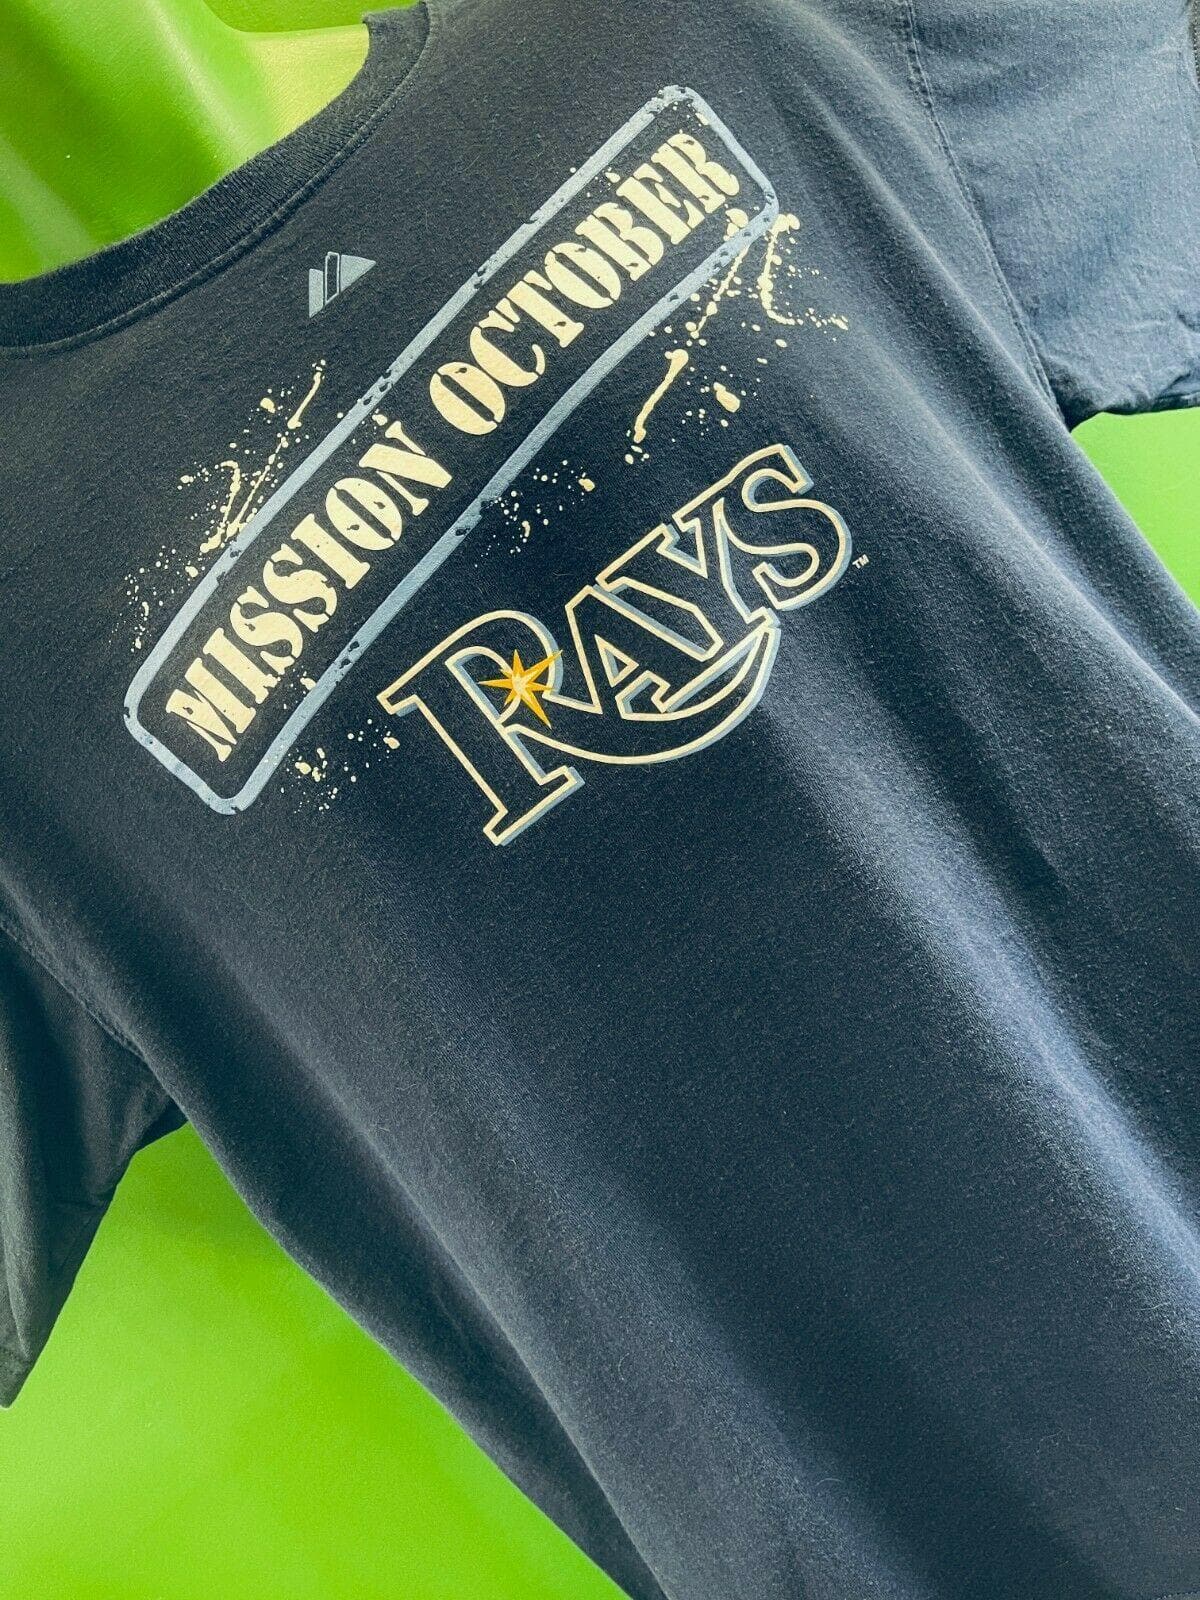 MLB Tampa Bay Rays Majestic "Mission October" T-Shirt Men's Large